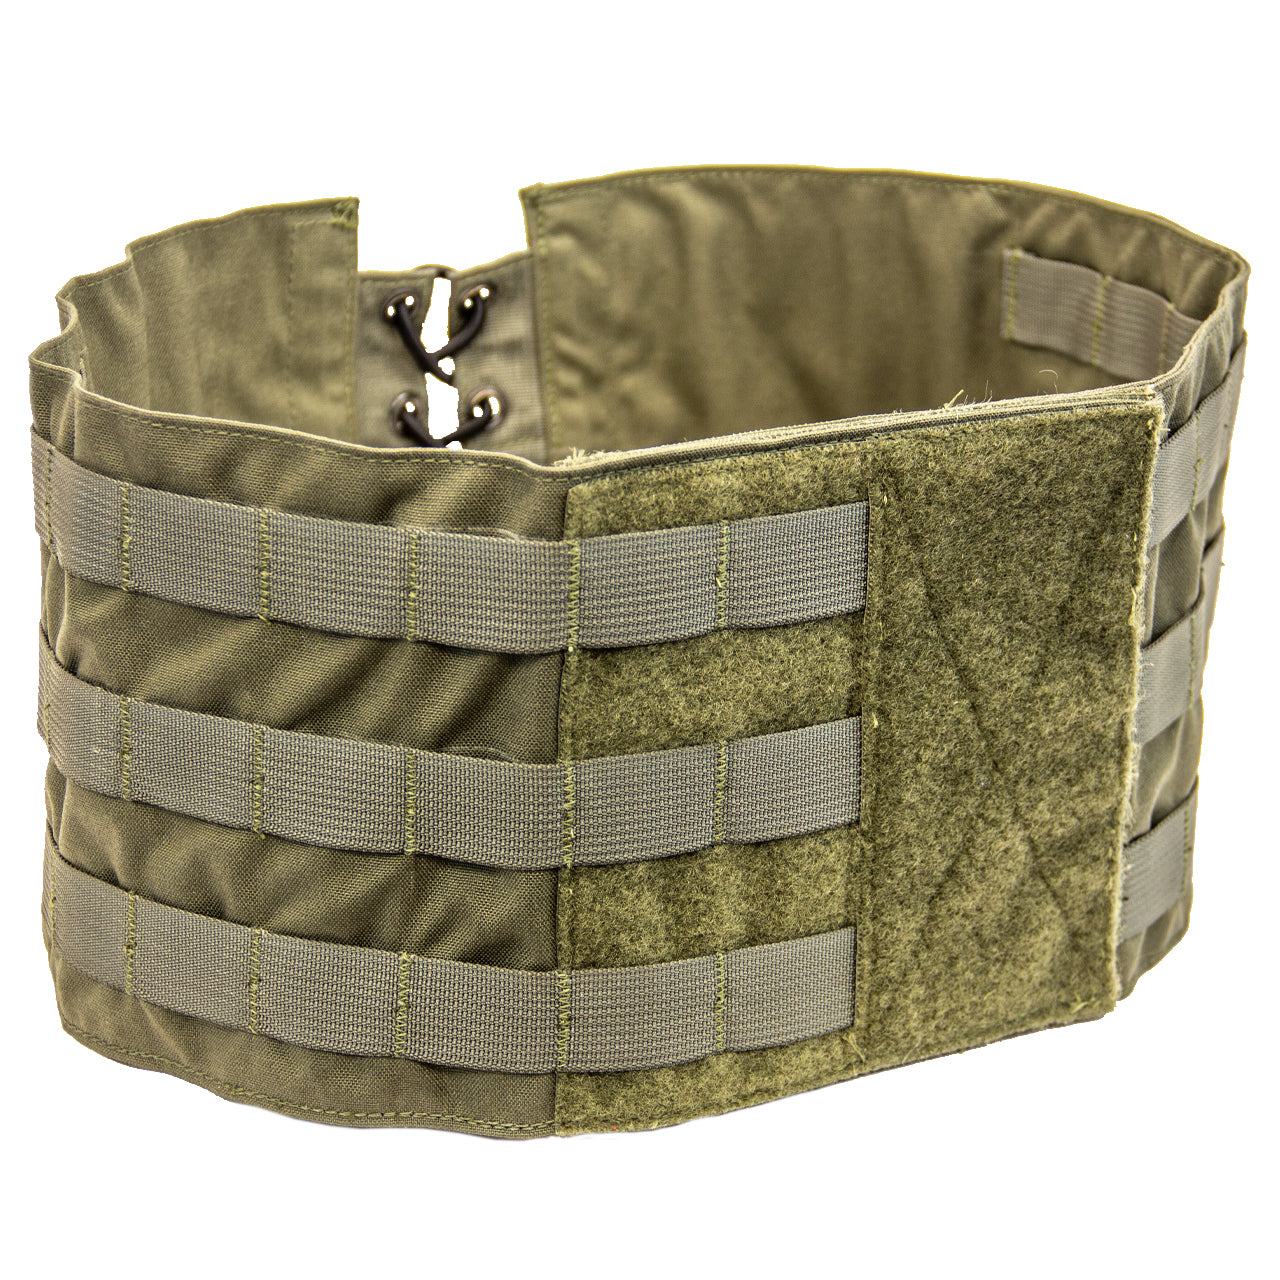 A Shellback Tactical Banshee XL Cummerbund with two straps and two buckles.